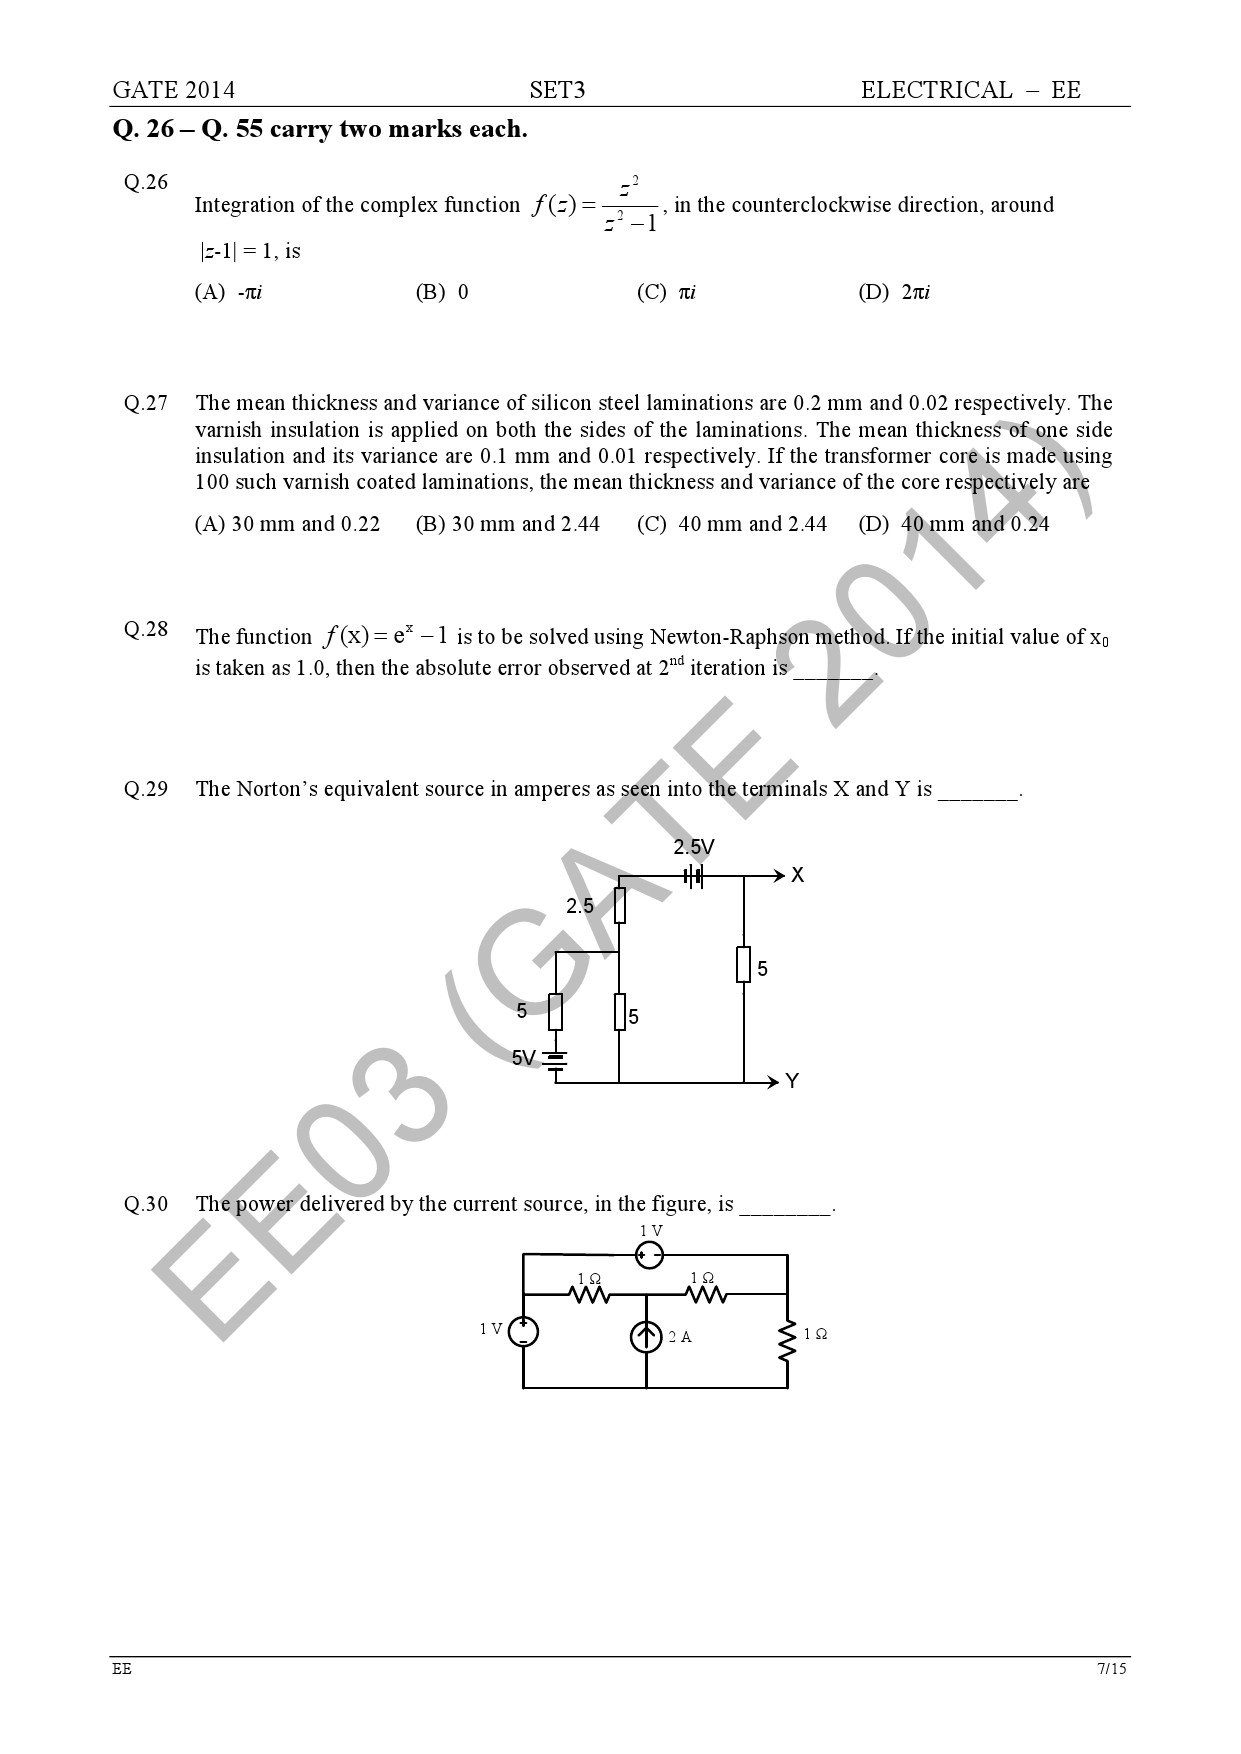 GATE Exam Question Paper 2014 Electrical Engineering Set 3 13